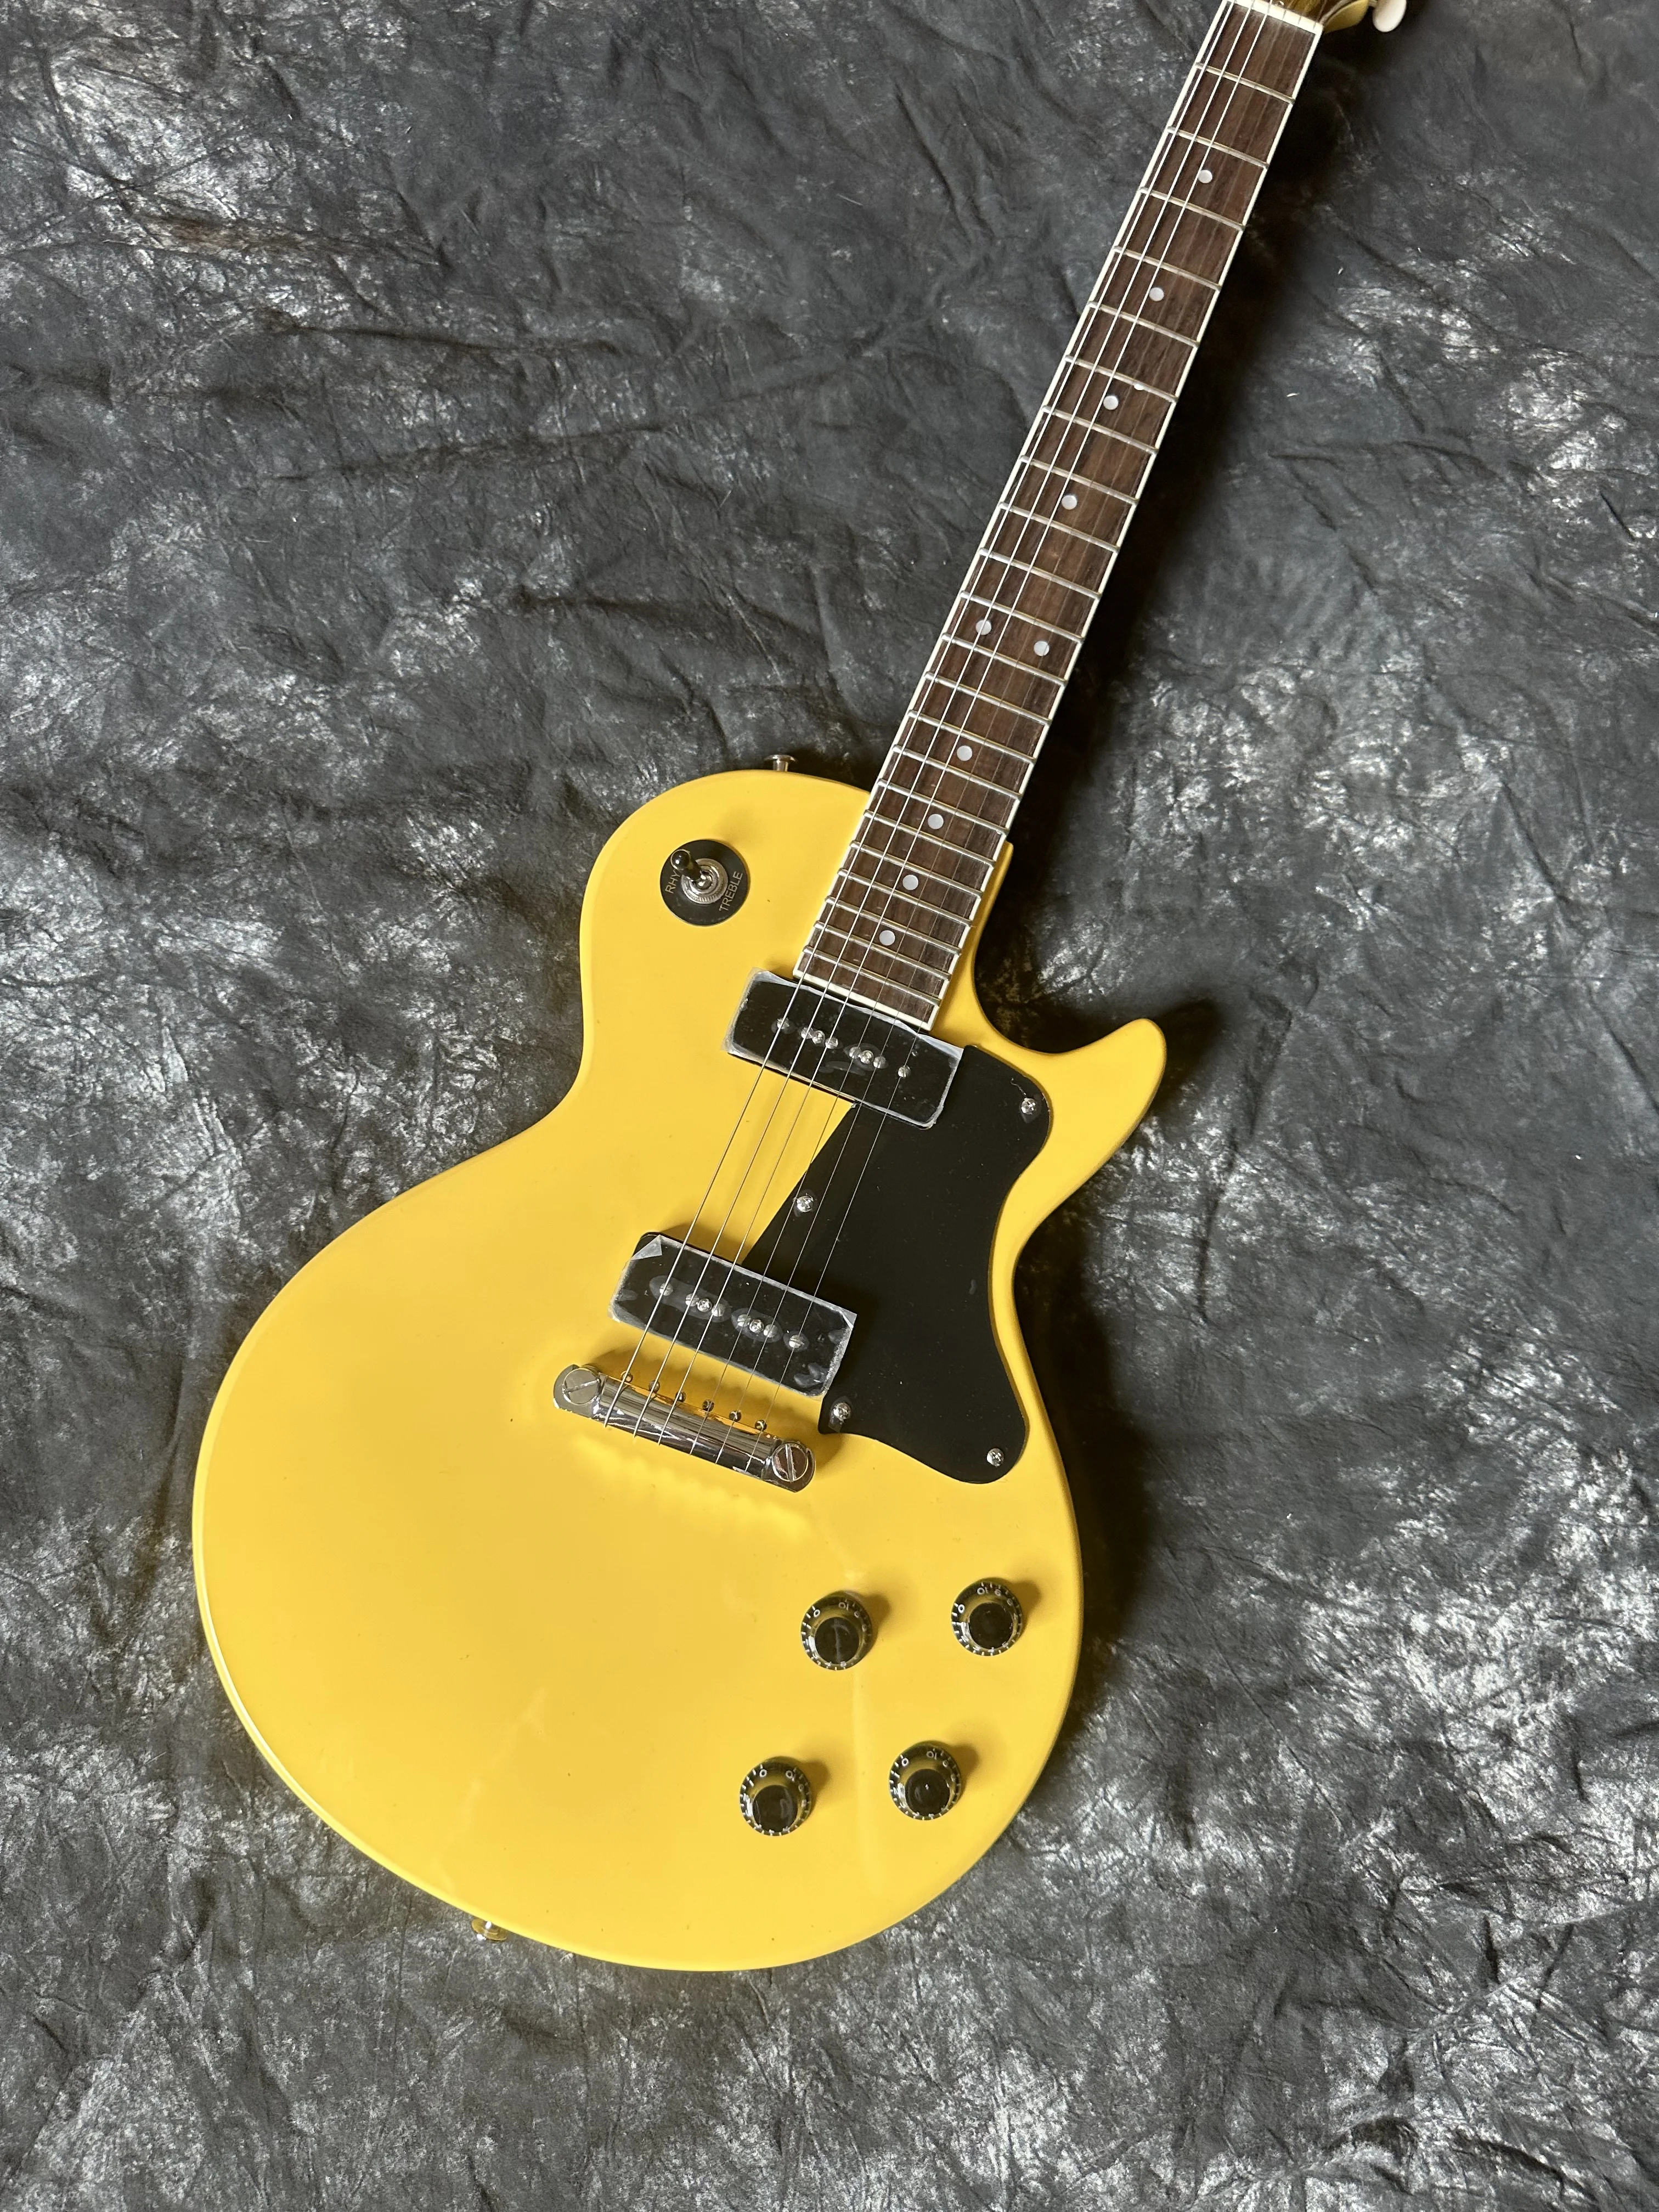 

Standard electric guitar, TV yellow, black P90 pickup, milky white retro tuner, available, lightning package